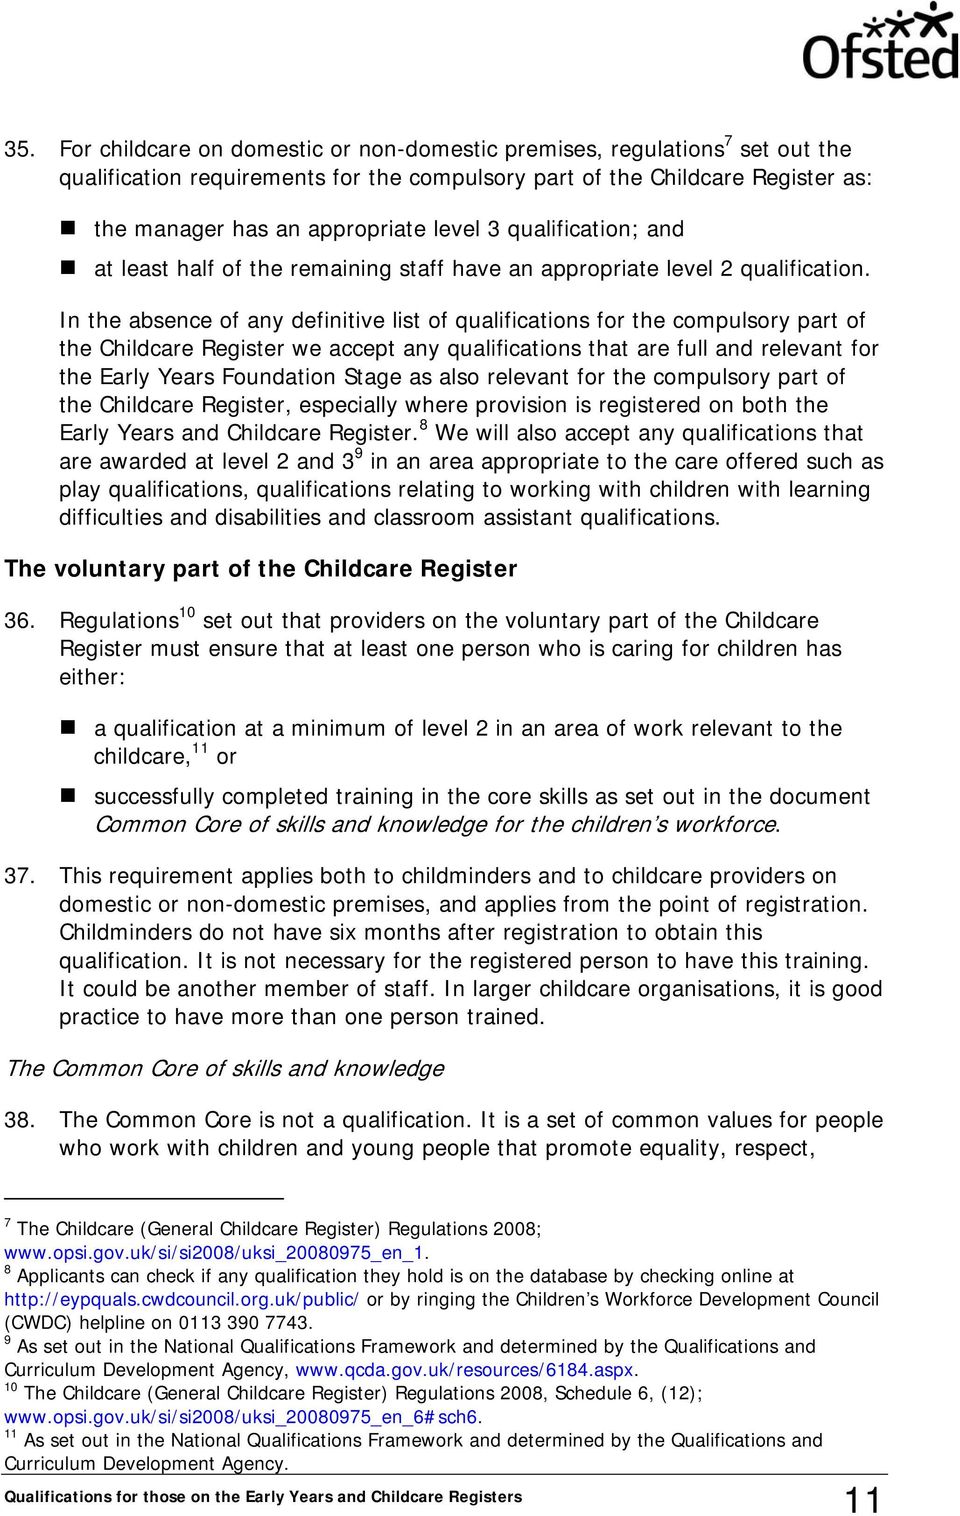 In the absence of any definitive list of qualifications for the compulsory part of the Childcare Register we accept any qualifications that are full and relevant for the Early Years Foundation Stage